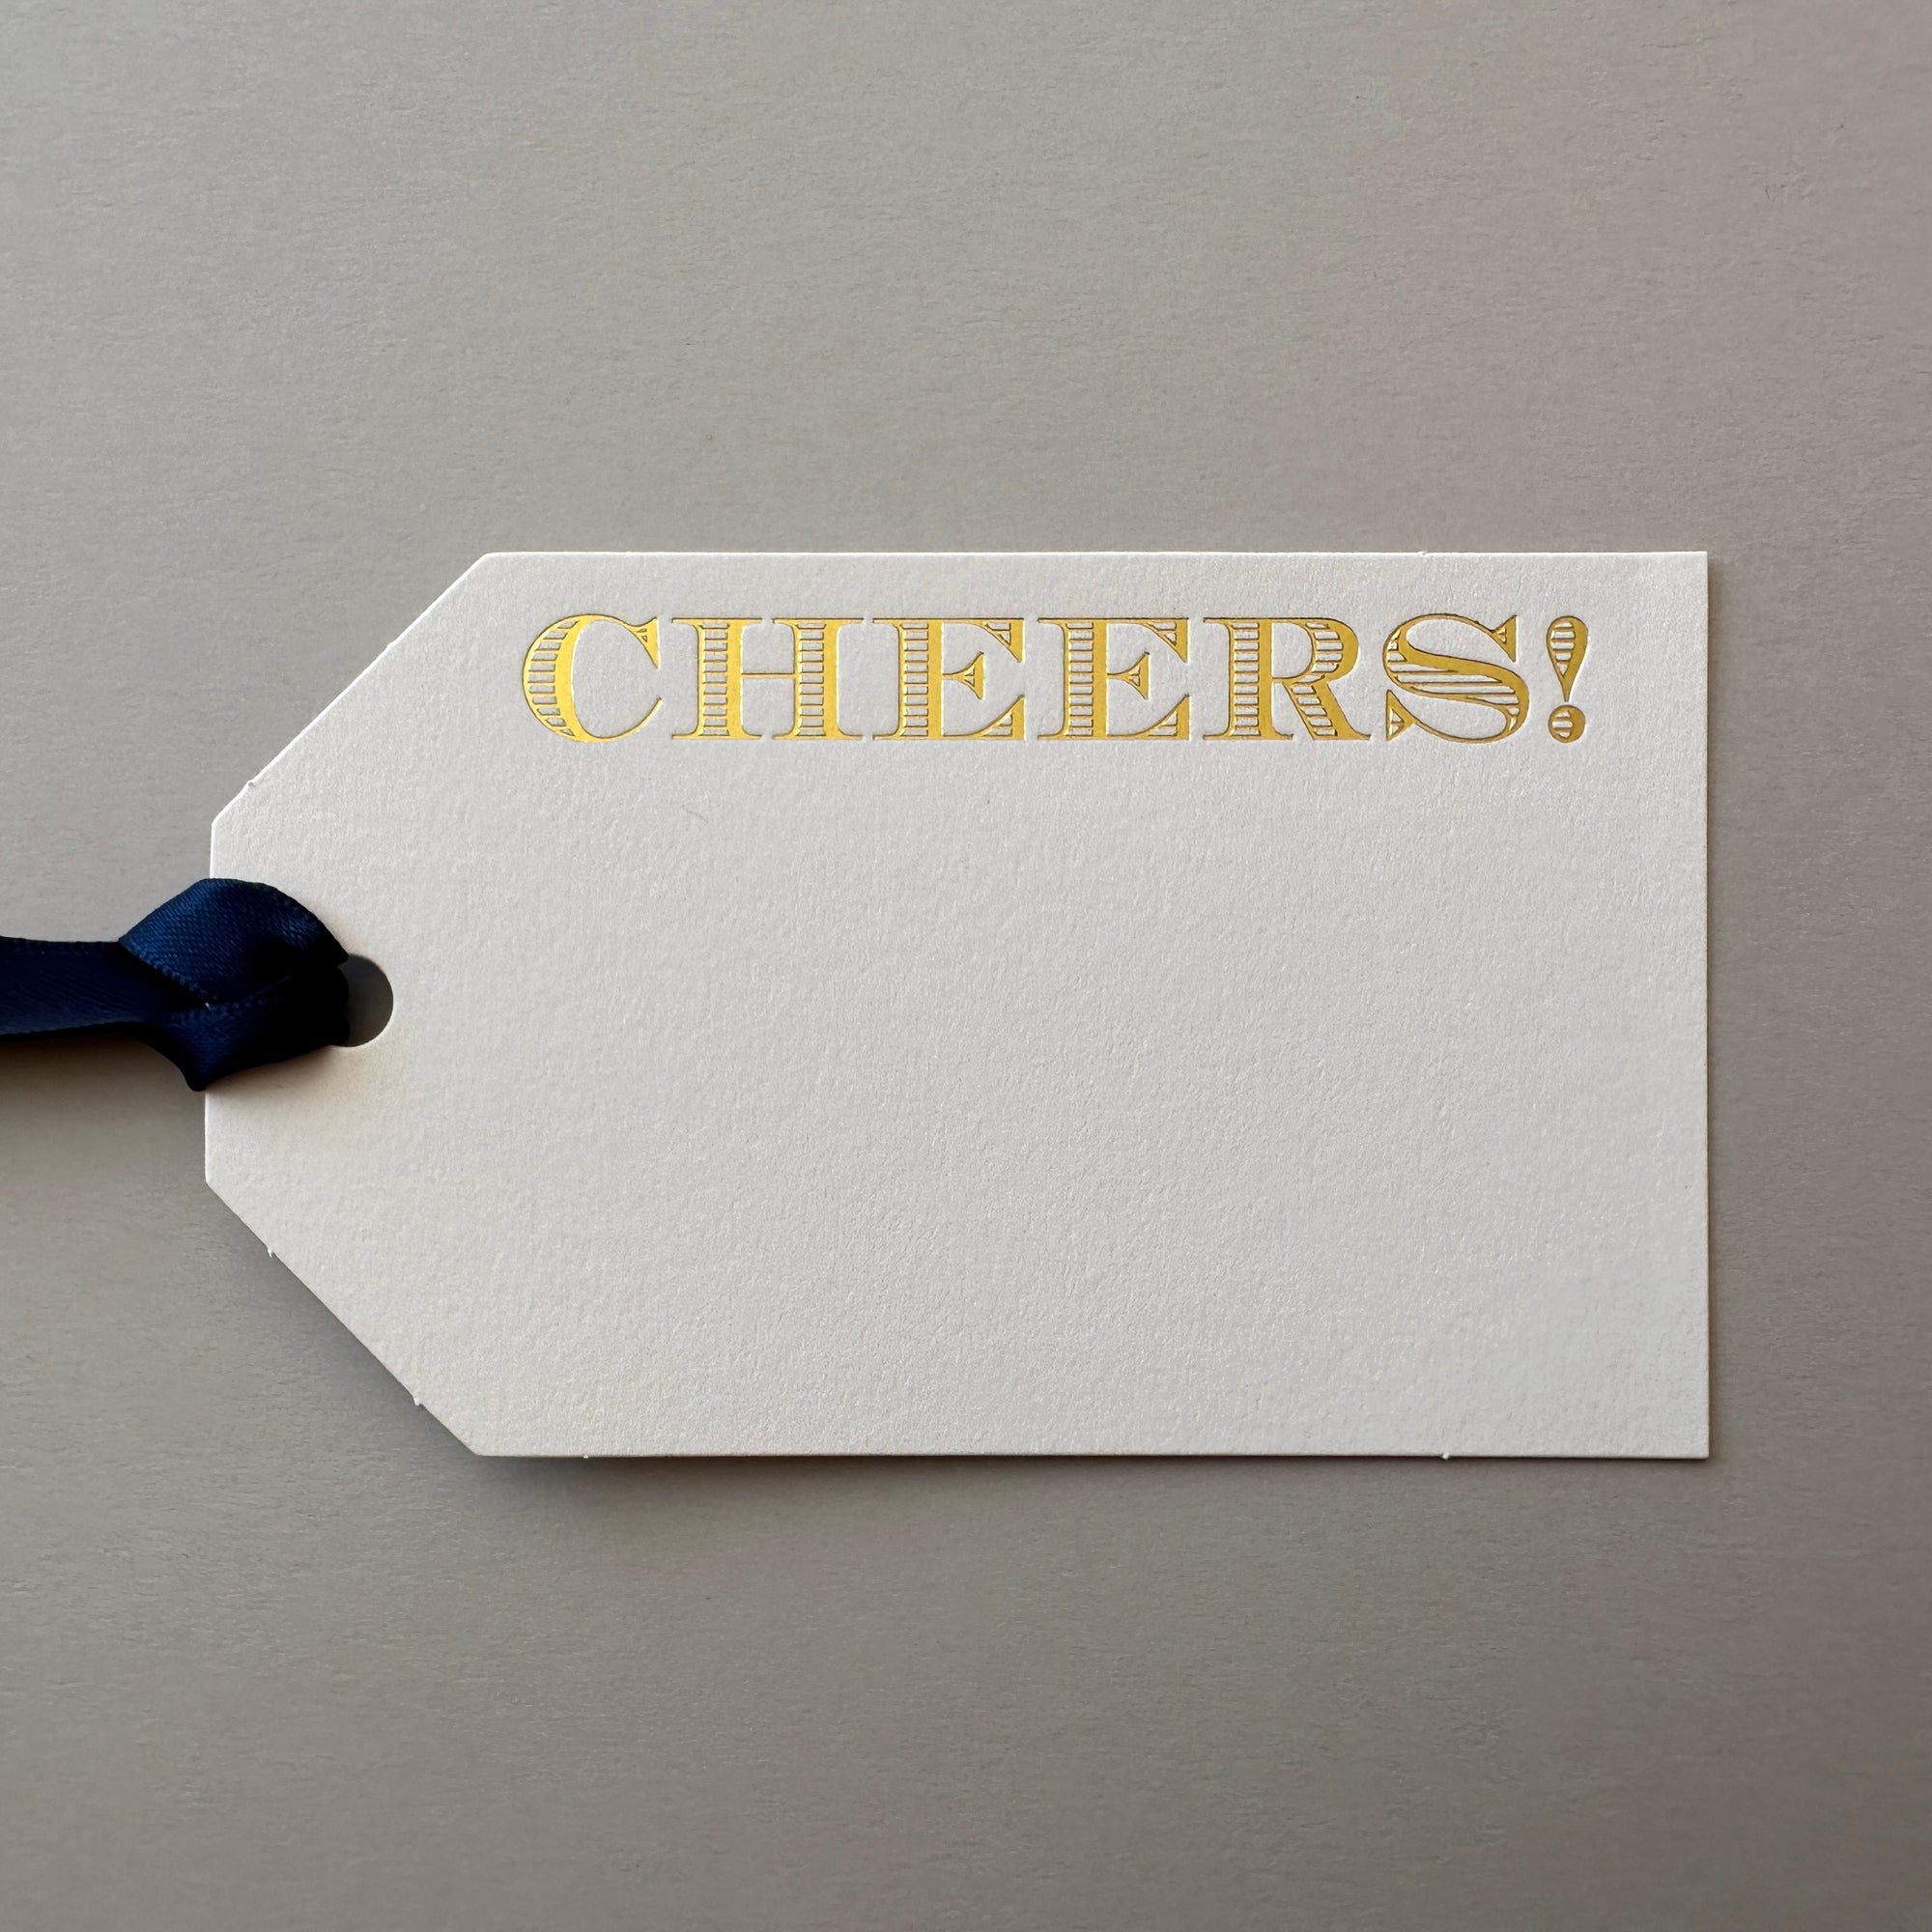 Cheers Gift Tags No. 1